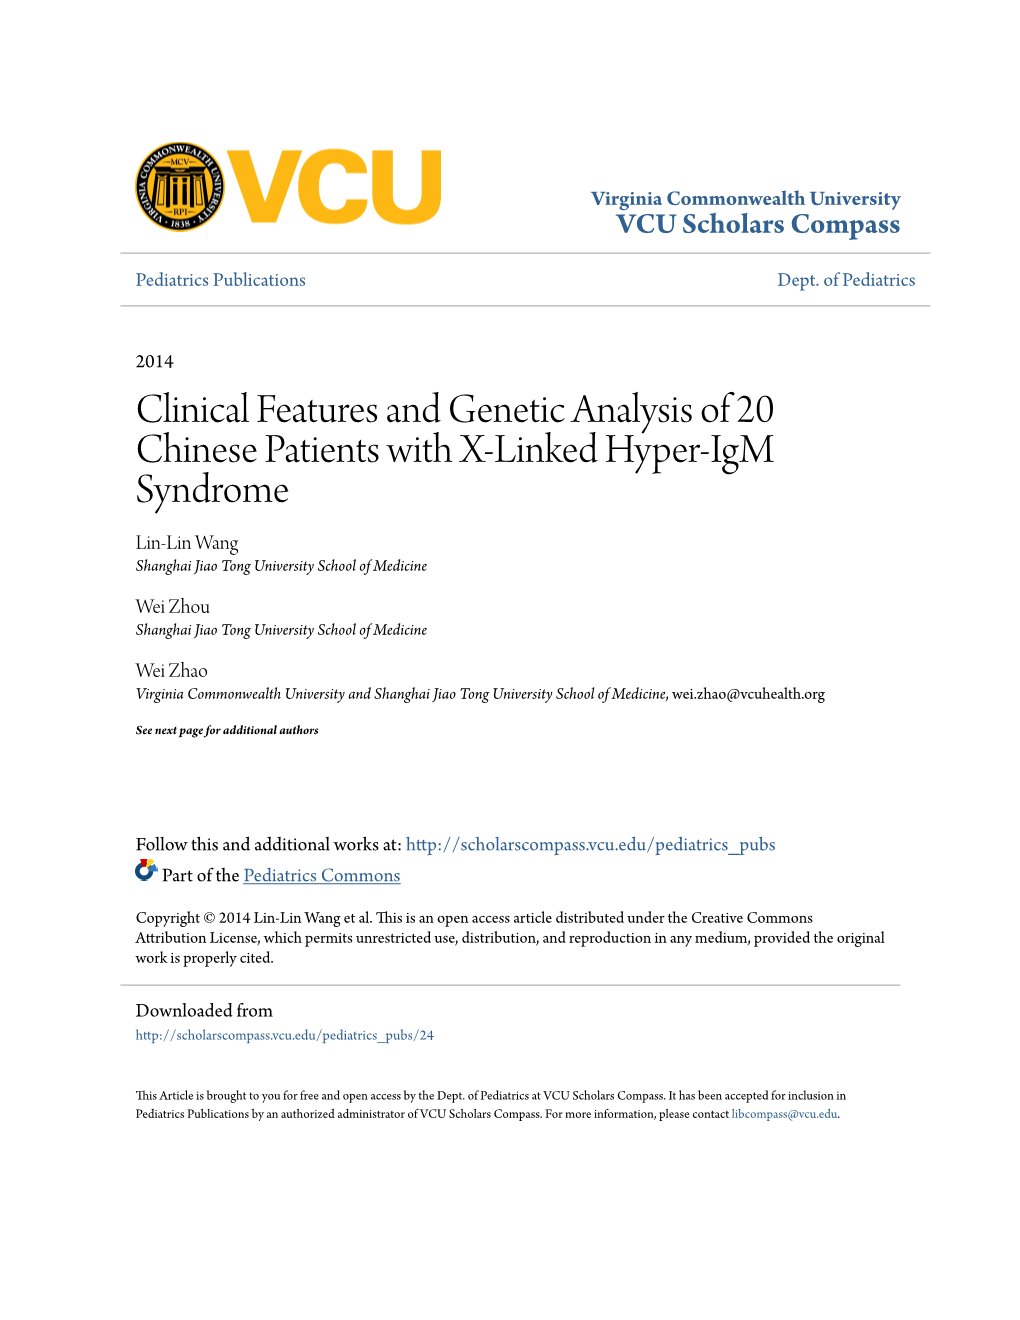 Clinical Features and Genetic Analysis of 20 Chinese Patients with X-Linked Hyper-Igm Syndrome Lin-Lin Wang Shanghai Jiao Tong University School of Medicine